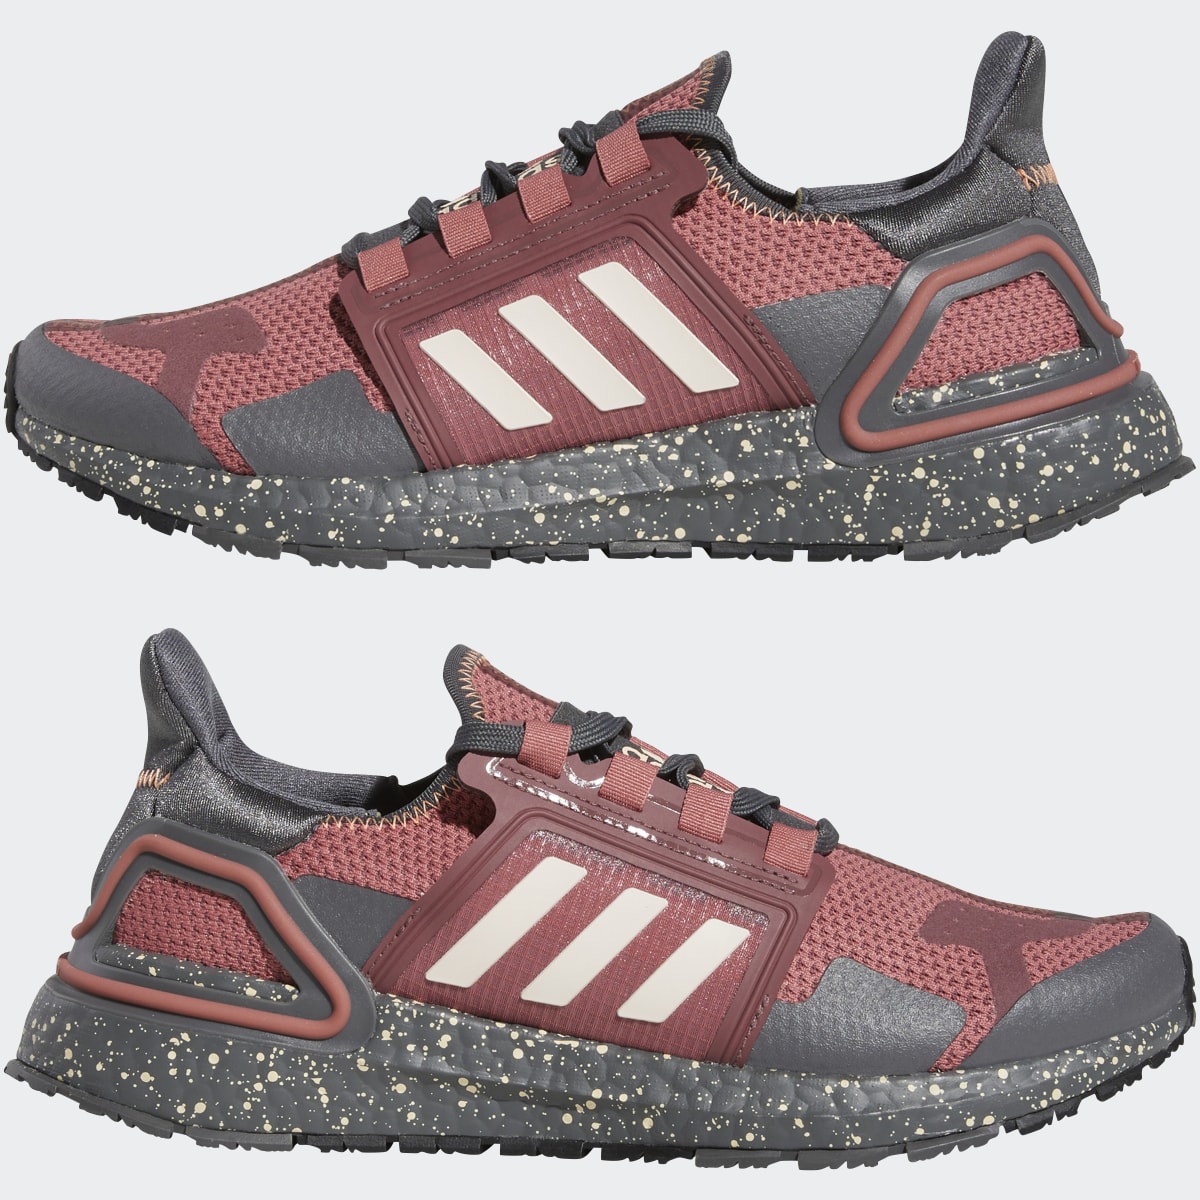 Adidas Ultraboost DNA City Explorer Outdoor Trail Running Sportswear Lifestyle Shoes. 8